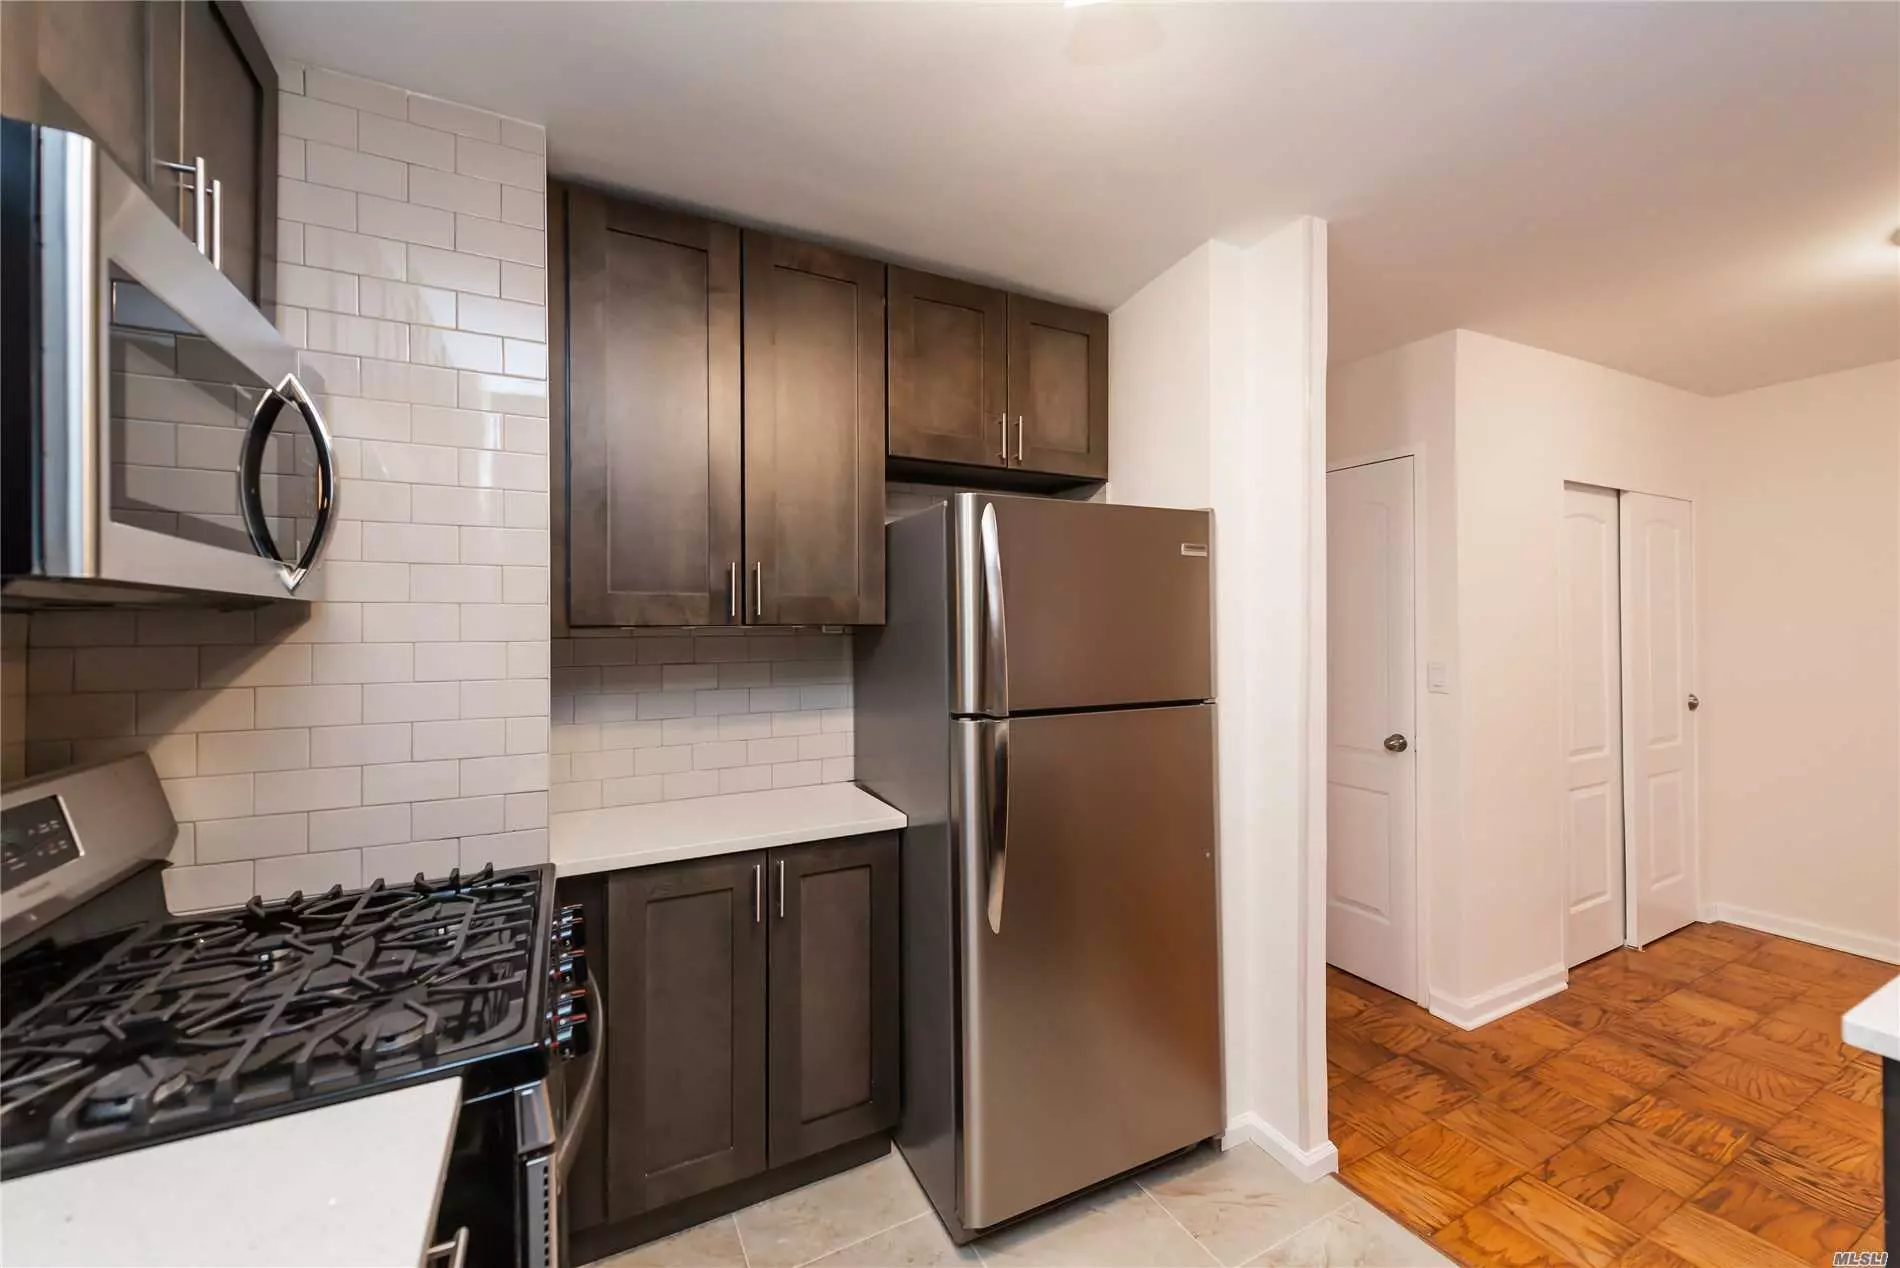 Fully available 1bedroom, 1 full bath renovated apartment in Flushing. Must have good credit.